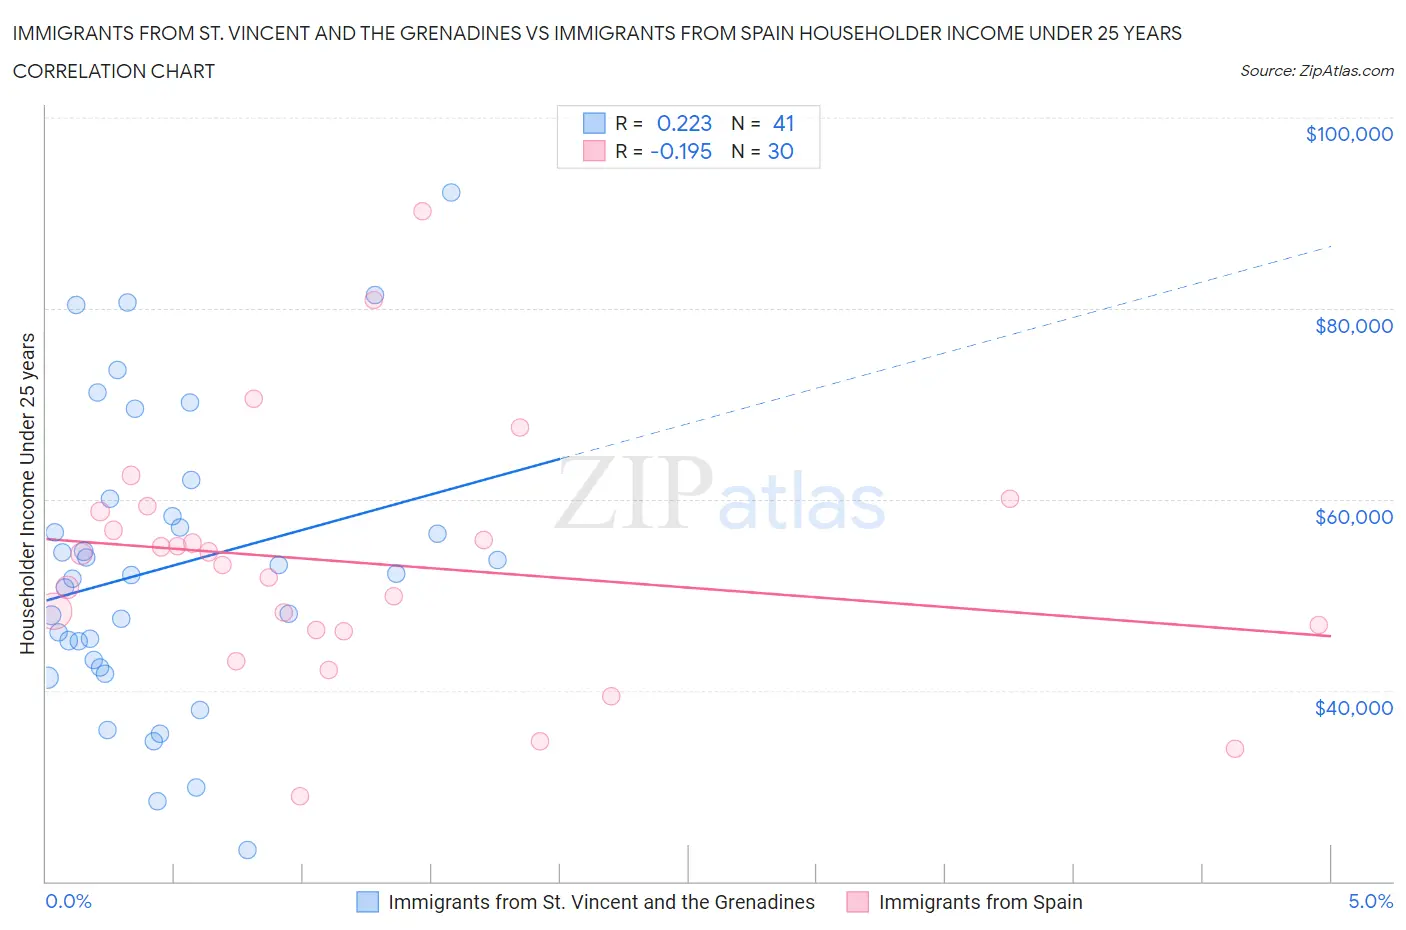 Immigrants from St. Vincent and the Grenadines vs Immigrants from Spain Householder Income Under 25 years